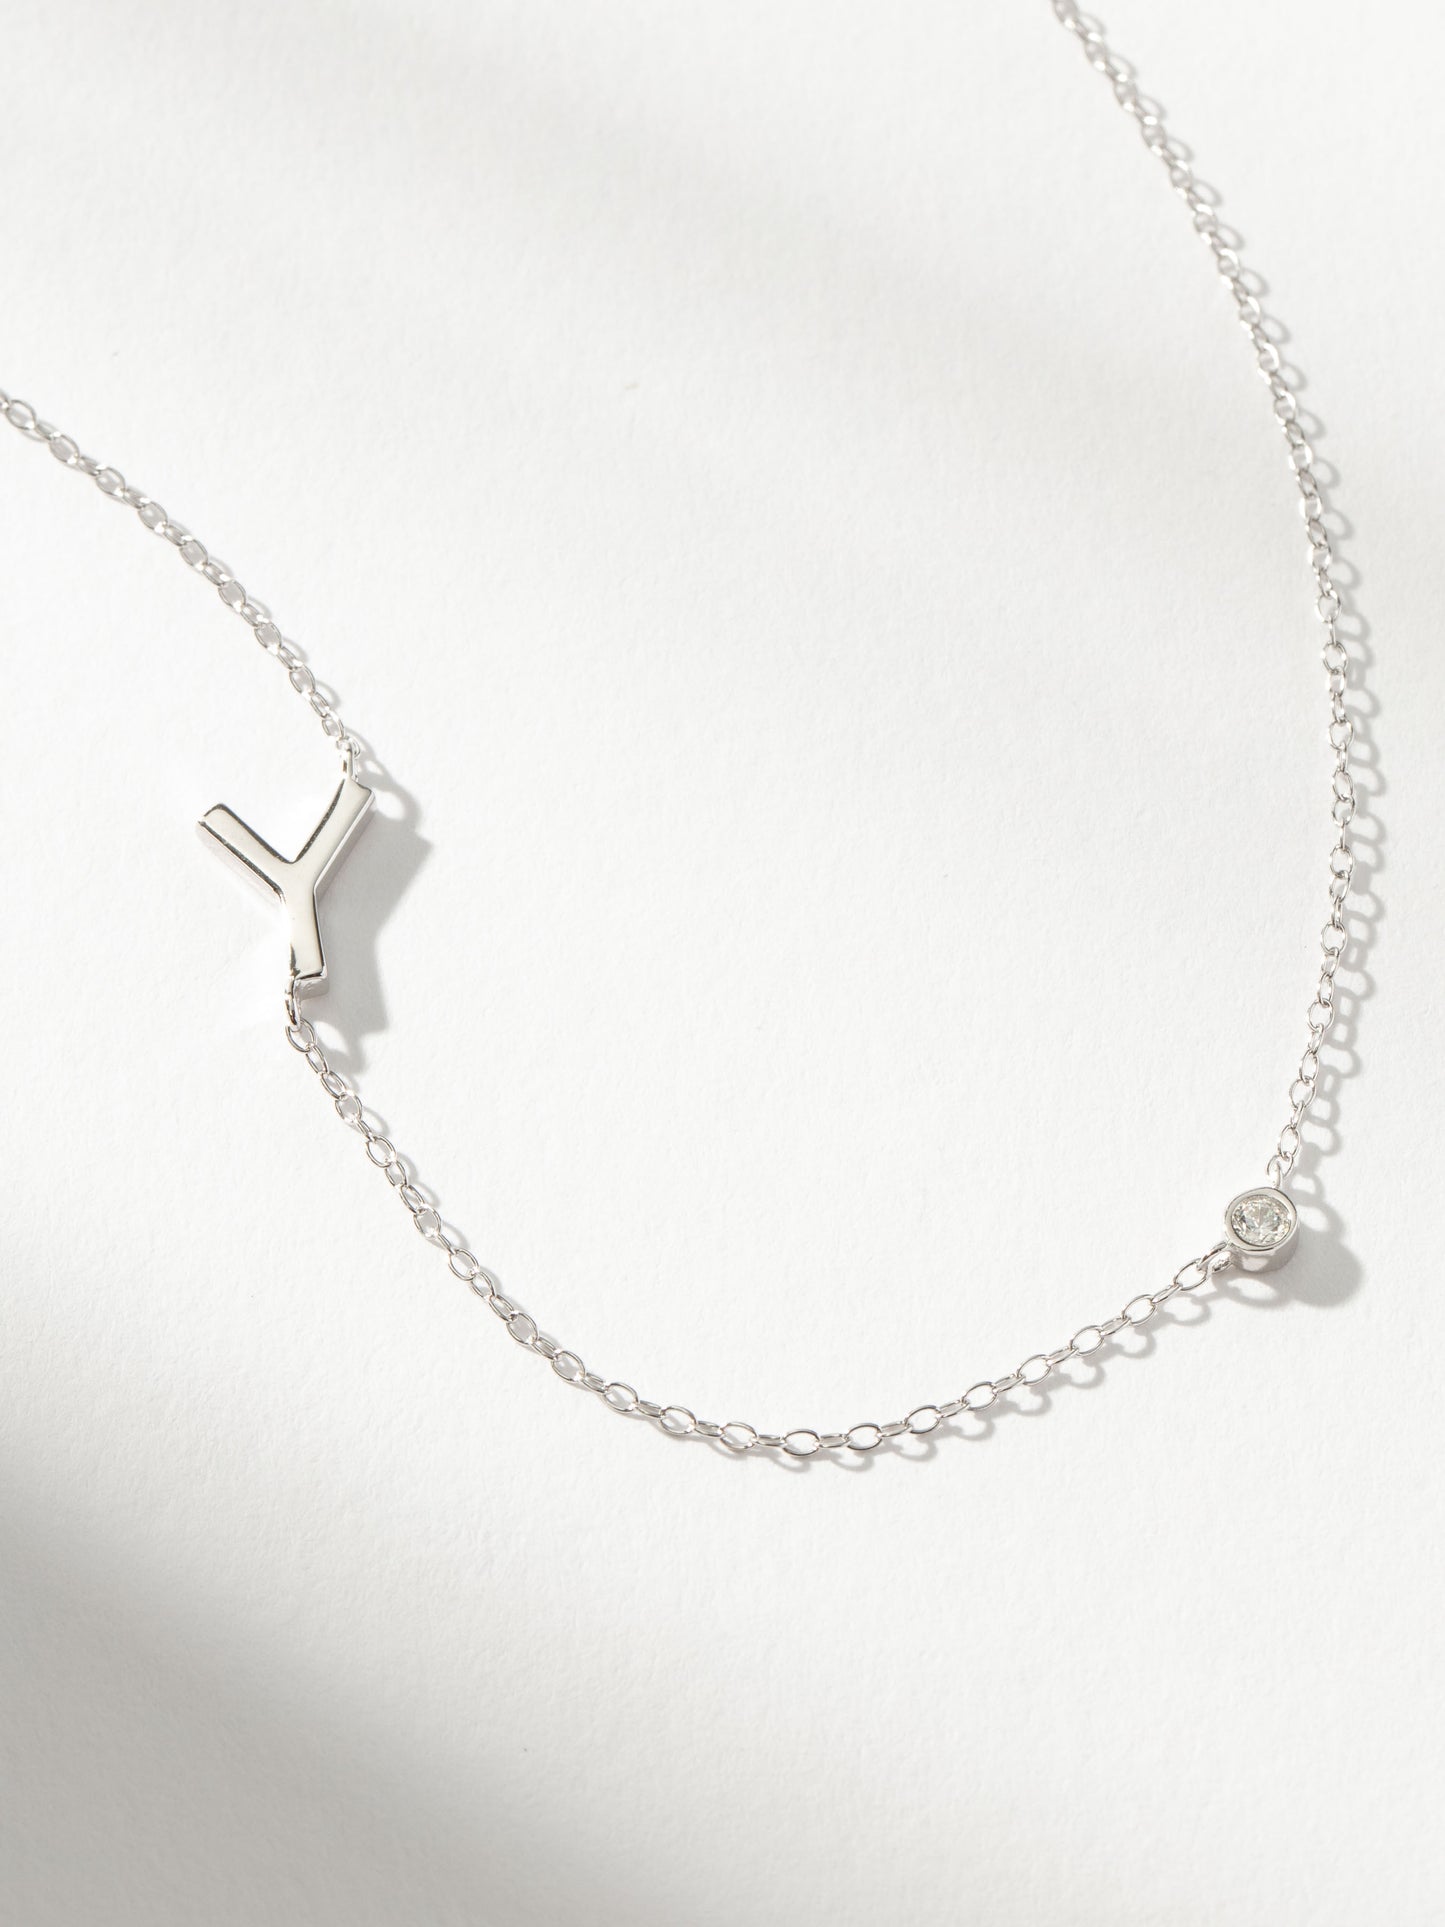 Personalized Touch Necklace | Sterling Silver Y | Product Image | Uncommon James